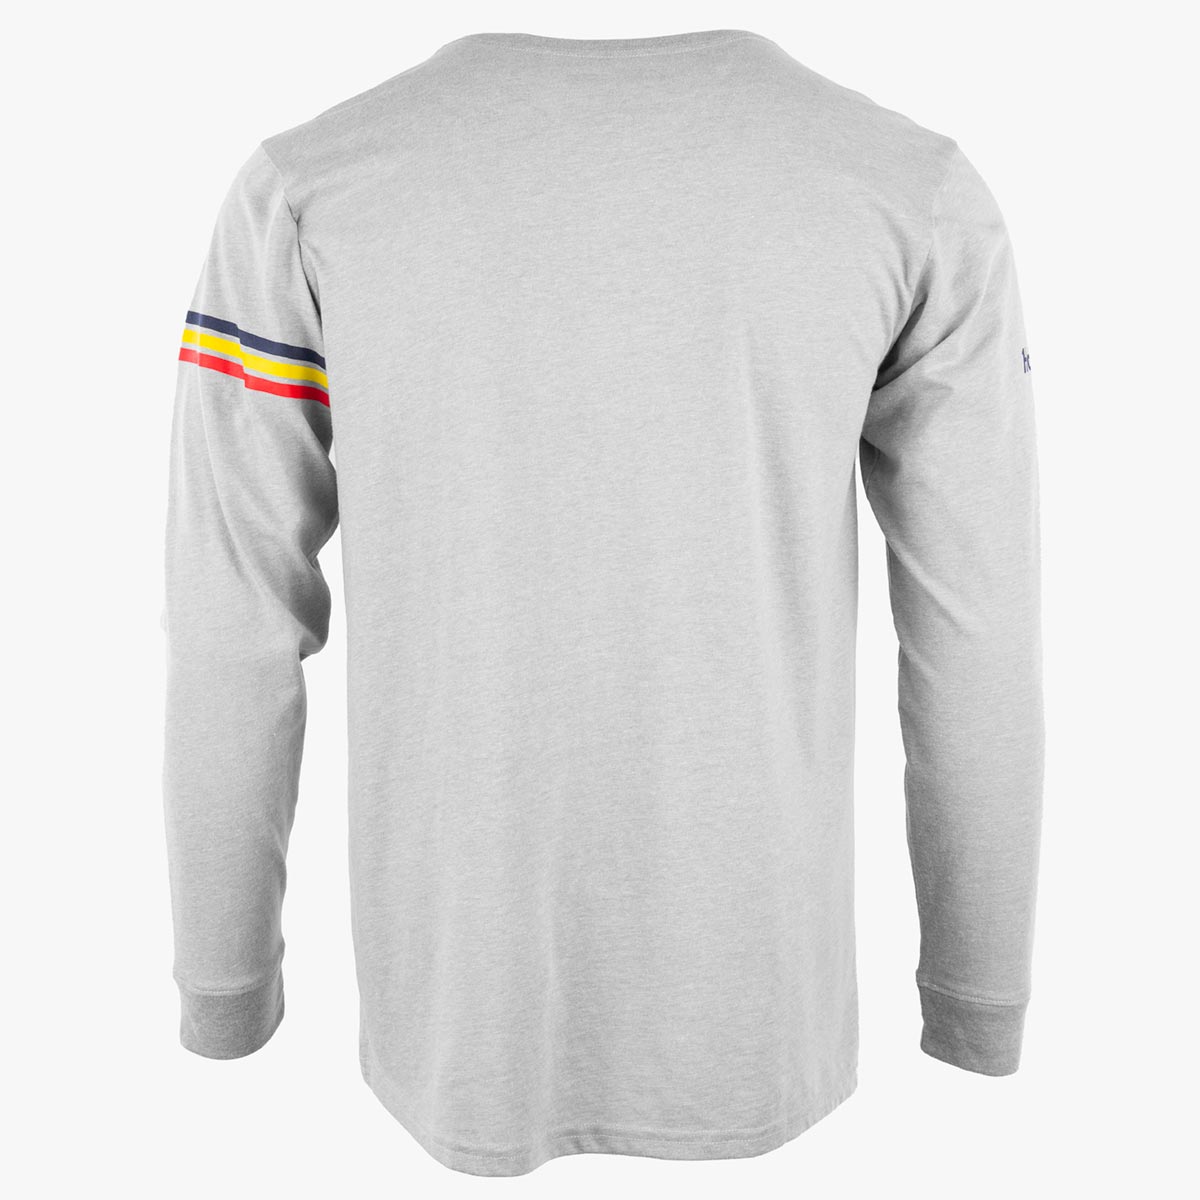 Red Bull Longsleeve Crewneck Tee with Racer Stripes image number 3